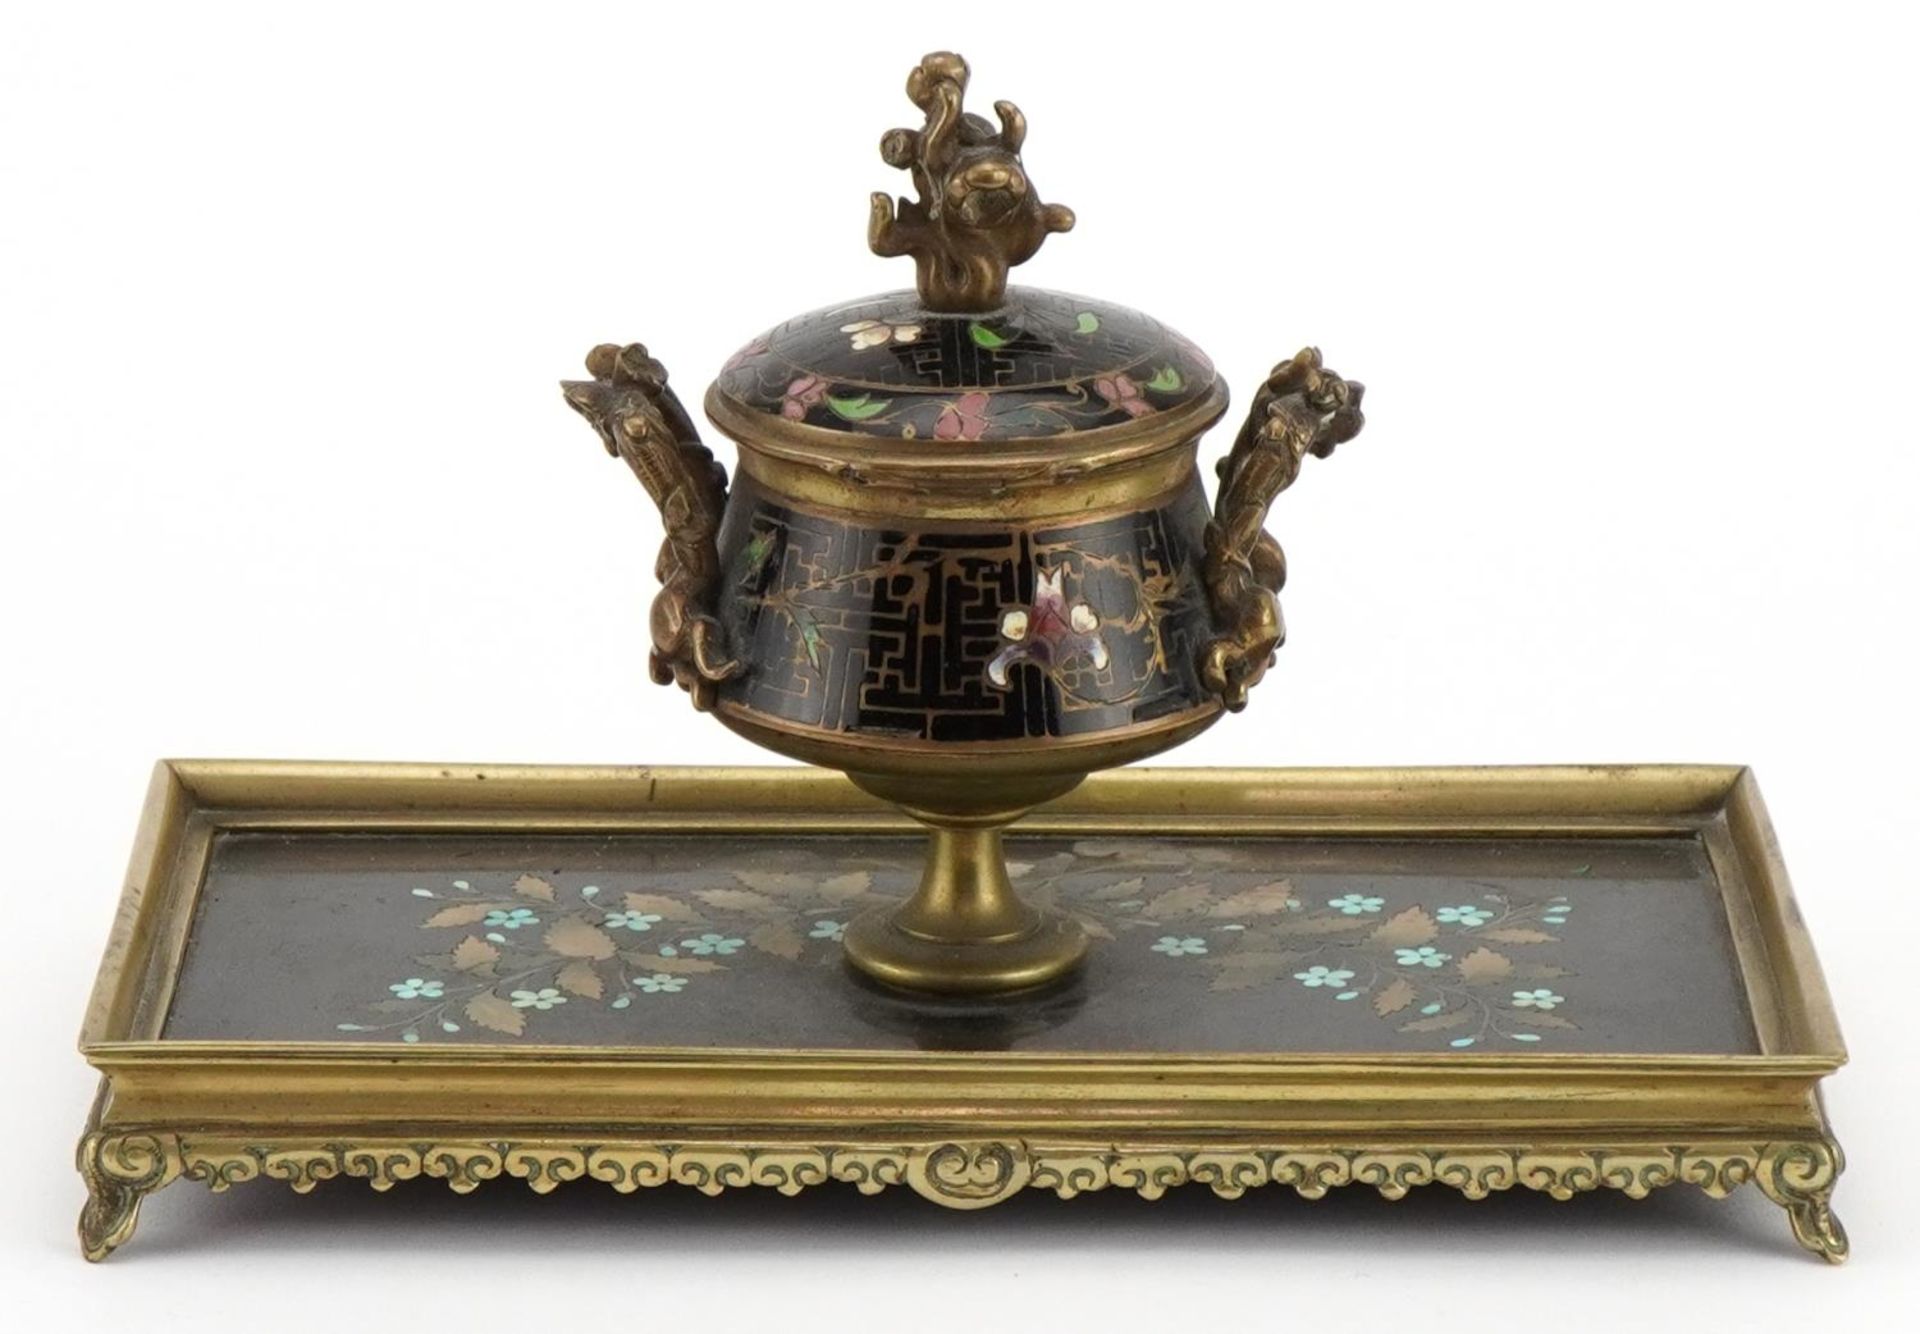 19th century ornate brass pietra dura and cloisonne desk inkwell with glass liner finely inlaid - Image 5 of 8